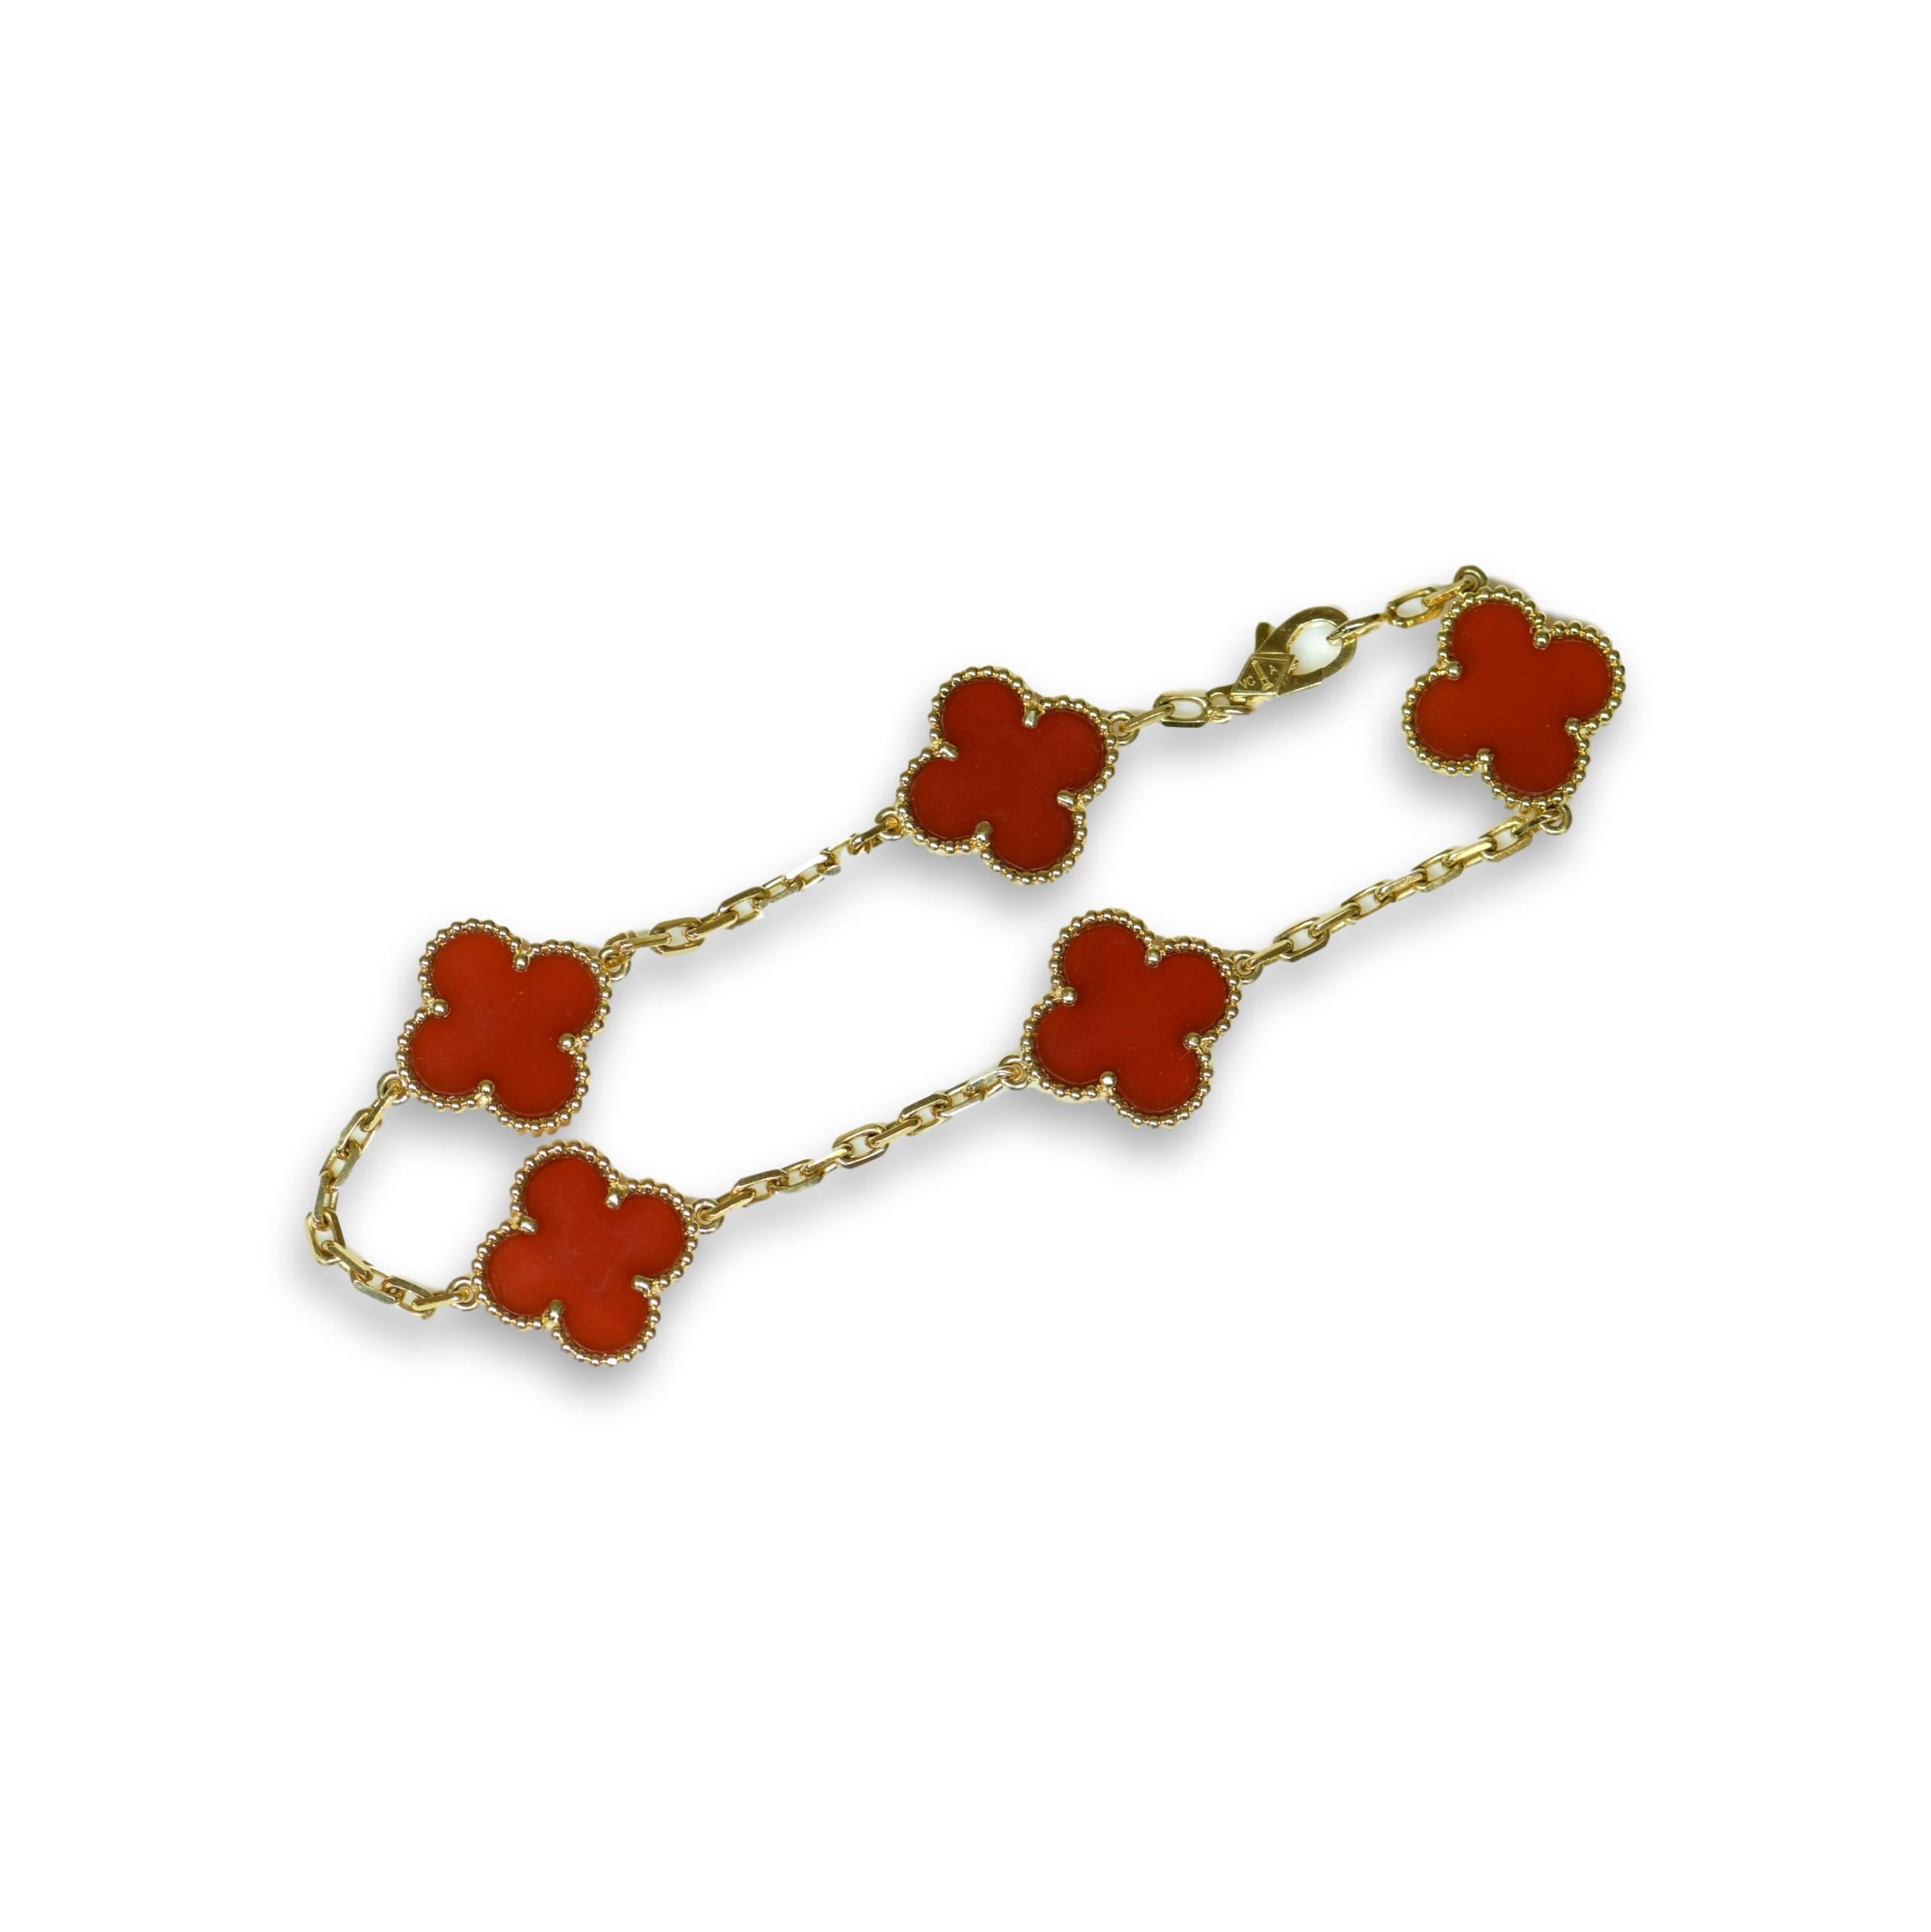 This stunning, vintage, VCA carnelian 18k gold bracelet, showcases the classic Alhambra design. Reflective of the very first creations by Van Cleef and Arpels in 1968, such pieces are characterised by their unique and timeless sophistication. In